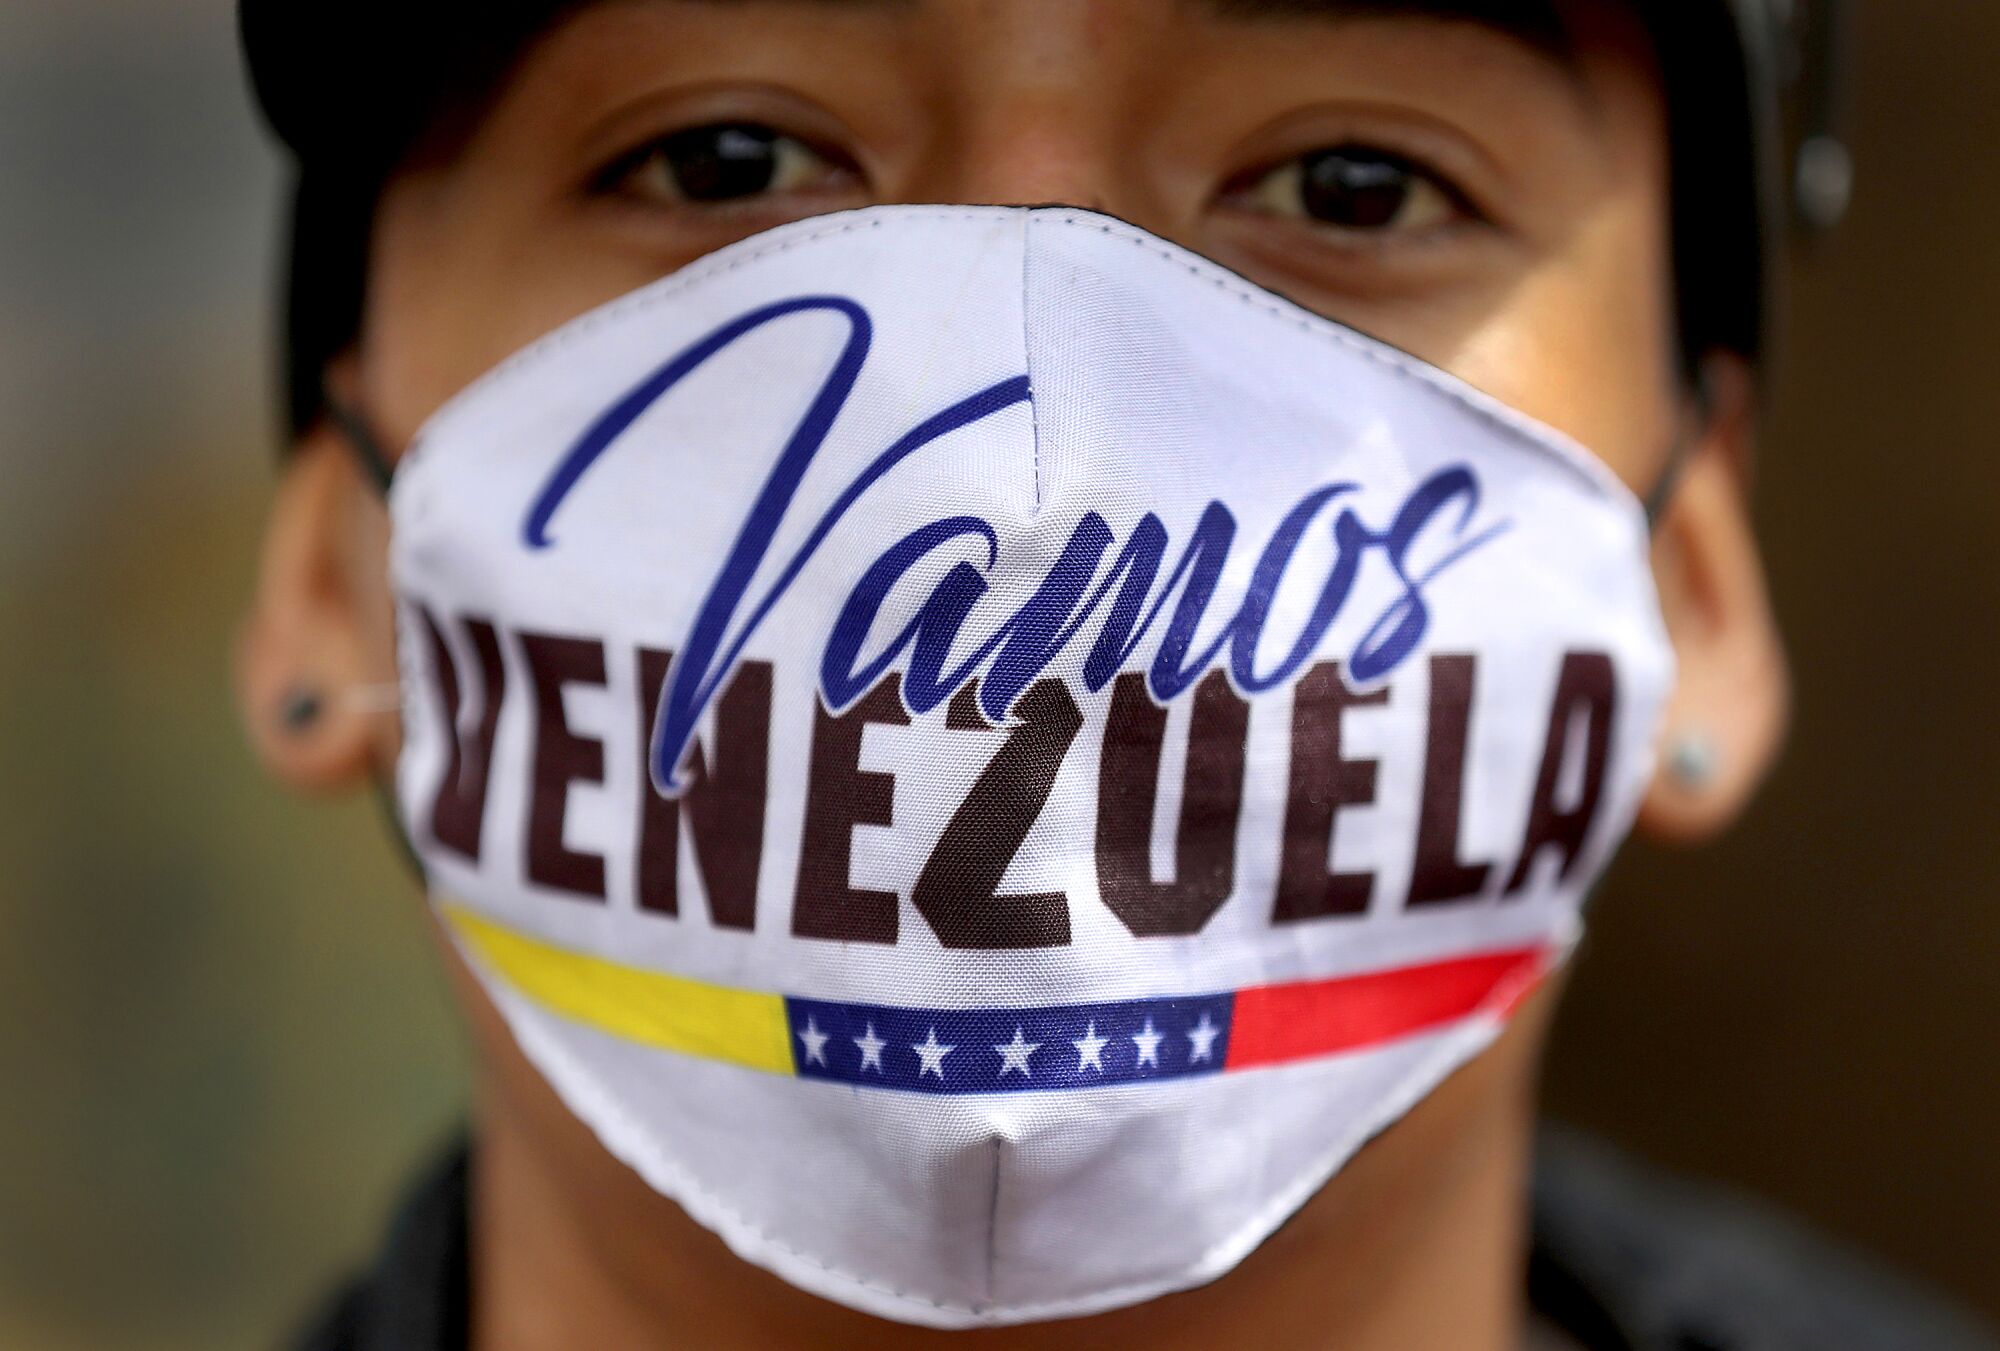 COLOMBIA: A Venezuelan migrant wears a mask that reads "Let's go Venezuela" in Spanish as he walks toward the Venezuelan border from Bogota. The Colombian government ordered a lockdown in an effort to prevent the spread of the coronavirus.